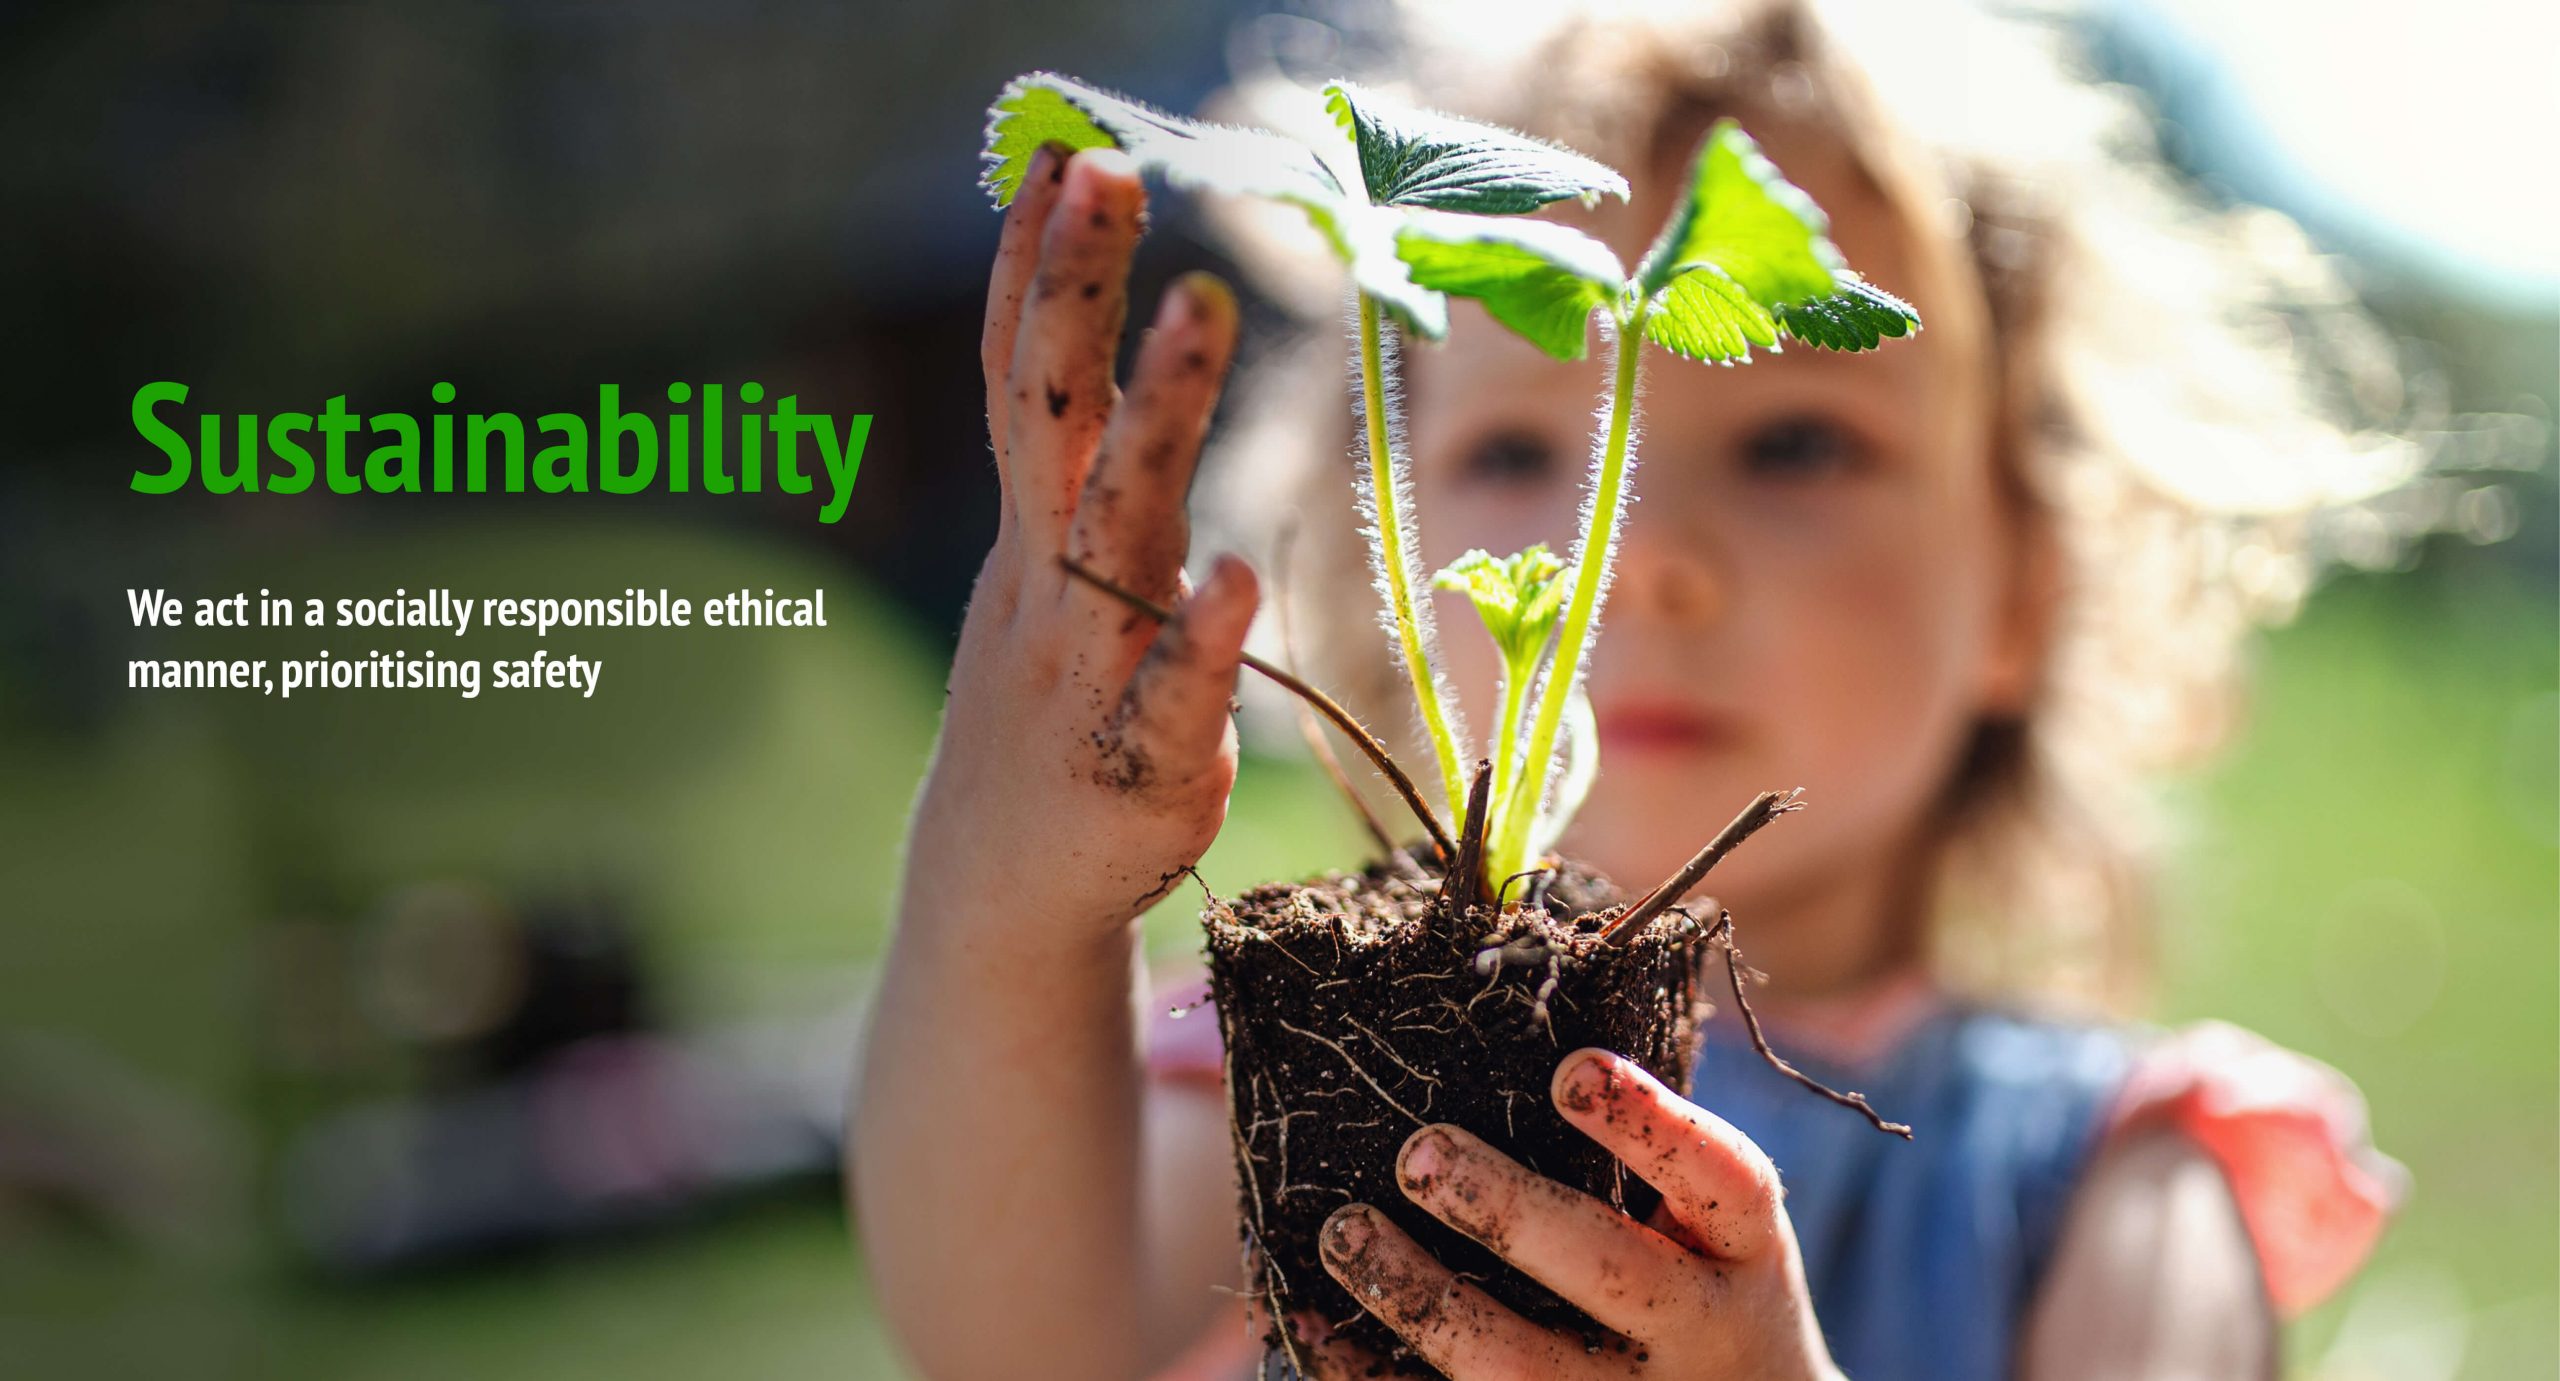 Sustainability - We act in socially responsible ethical manner, prioritising safety